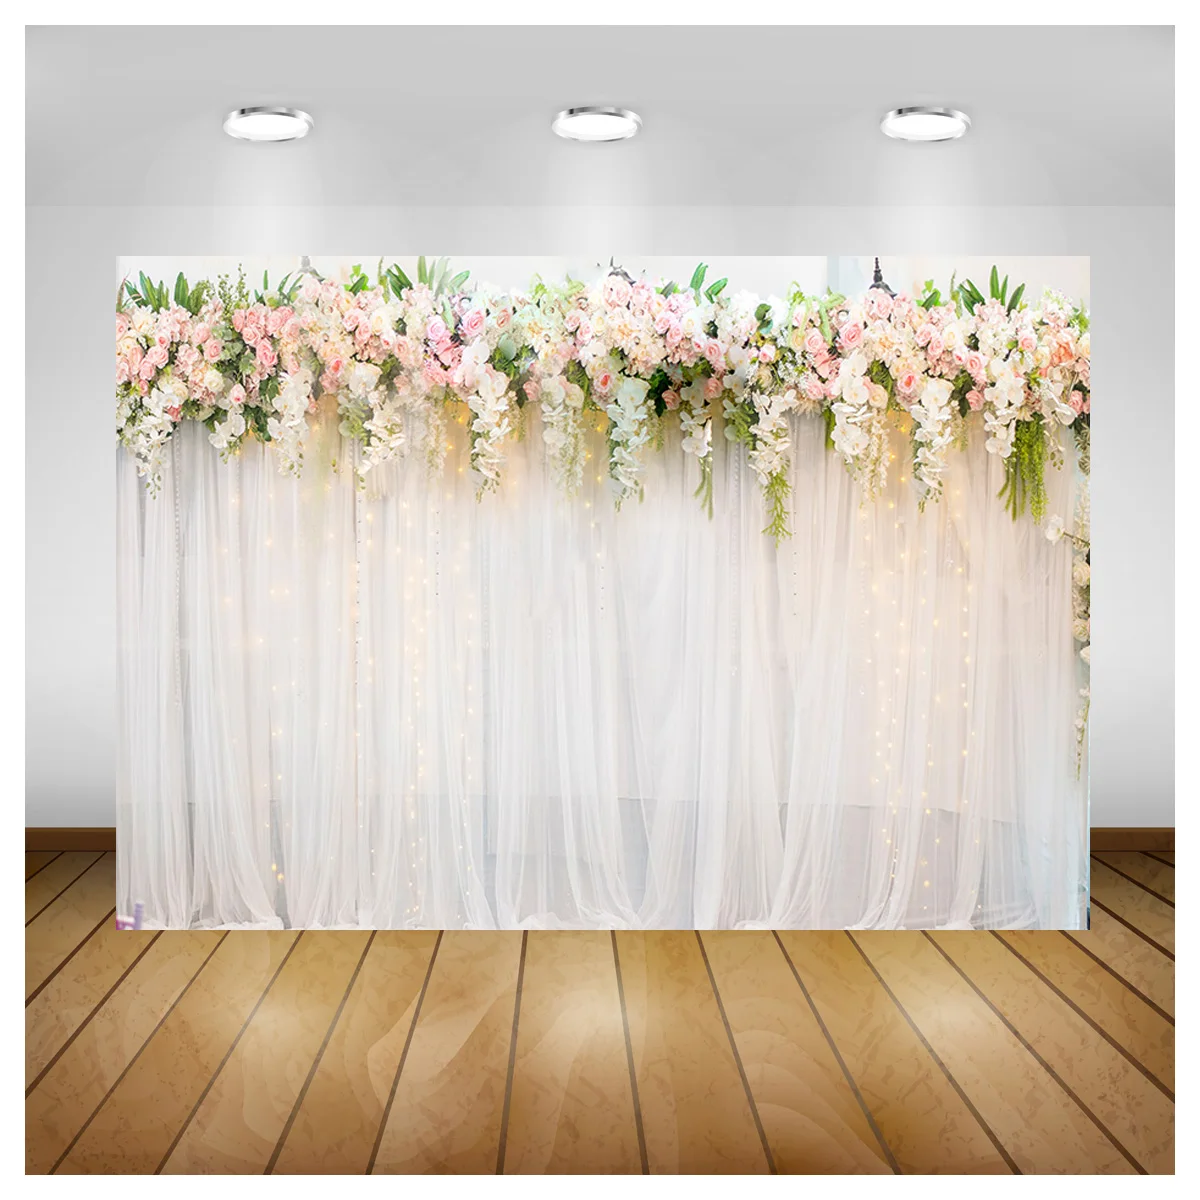 

SHUOZHIKE Colorful Wooden Board Digital Printed Photography Backdrop Prop Flower Theme Photo Studio Background HH-02